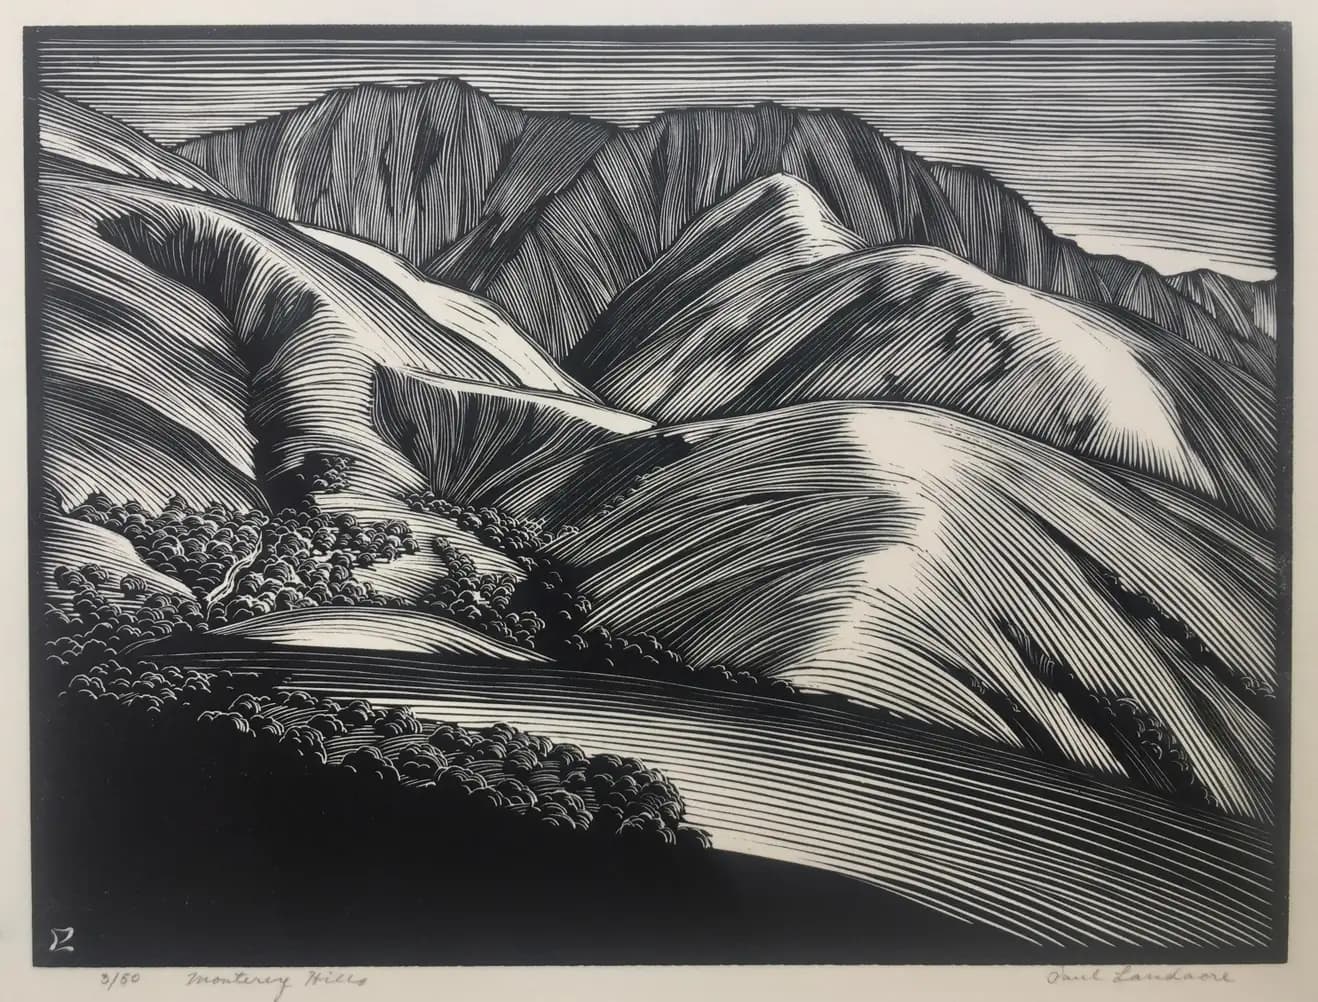 High resolution photograph of a wood engraving by woodworker artist Paul Landacre, illustrating the undulating hills of Monterey, California.